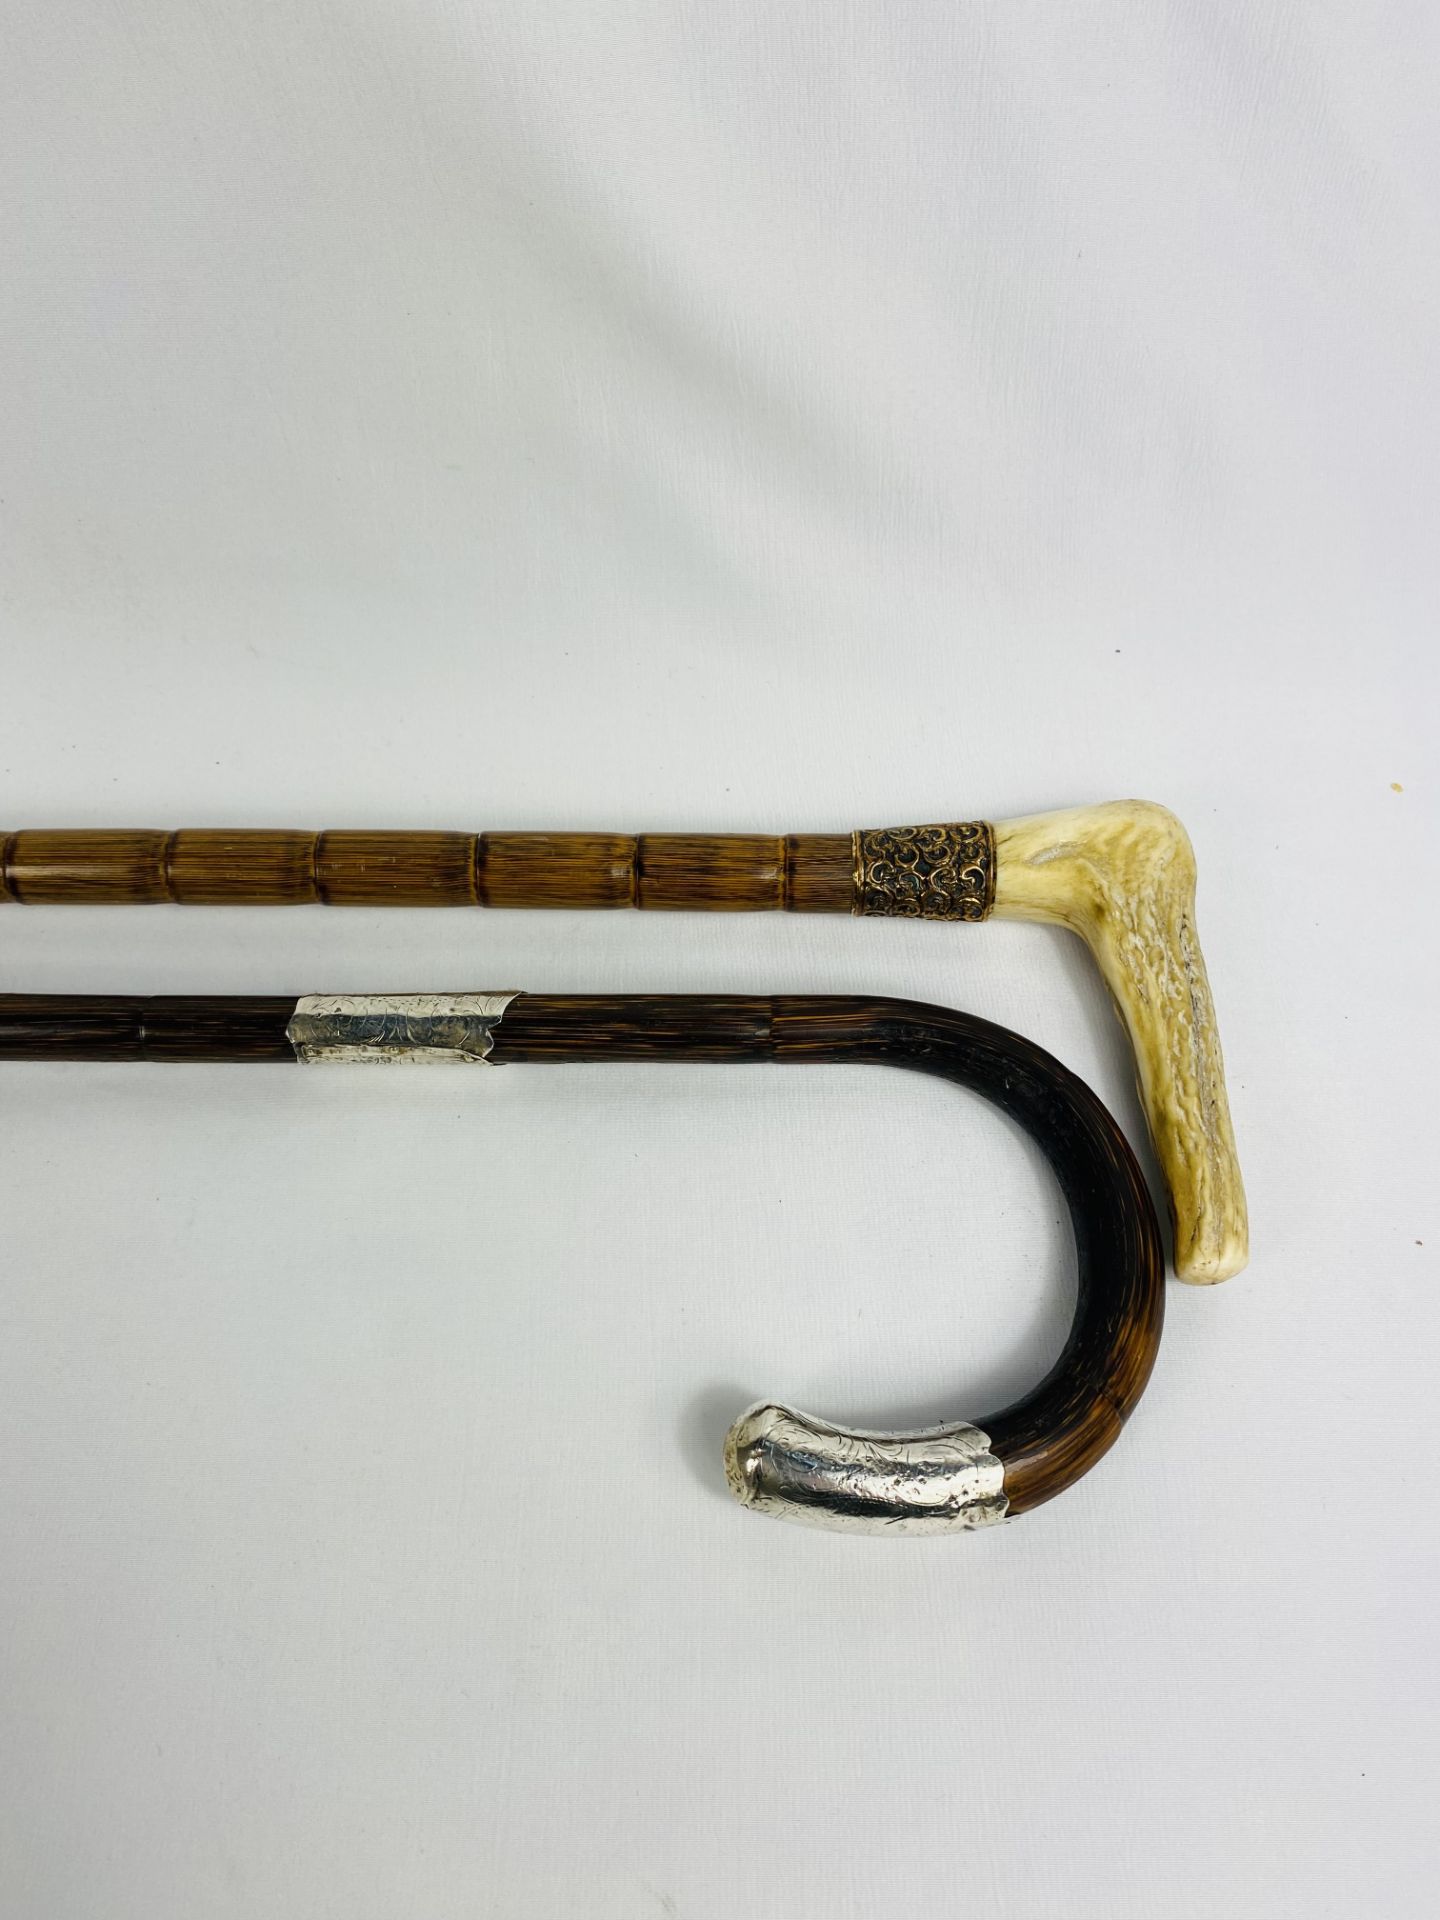 Silver tipped cane together with a cane with yellow metal ferrule - Image 2 of 4